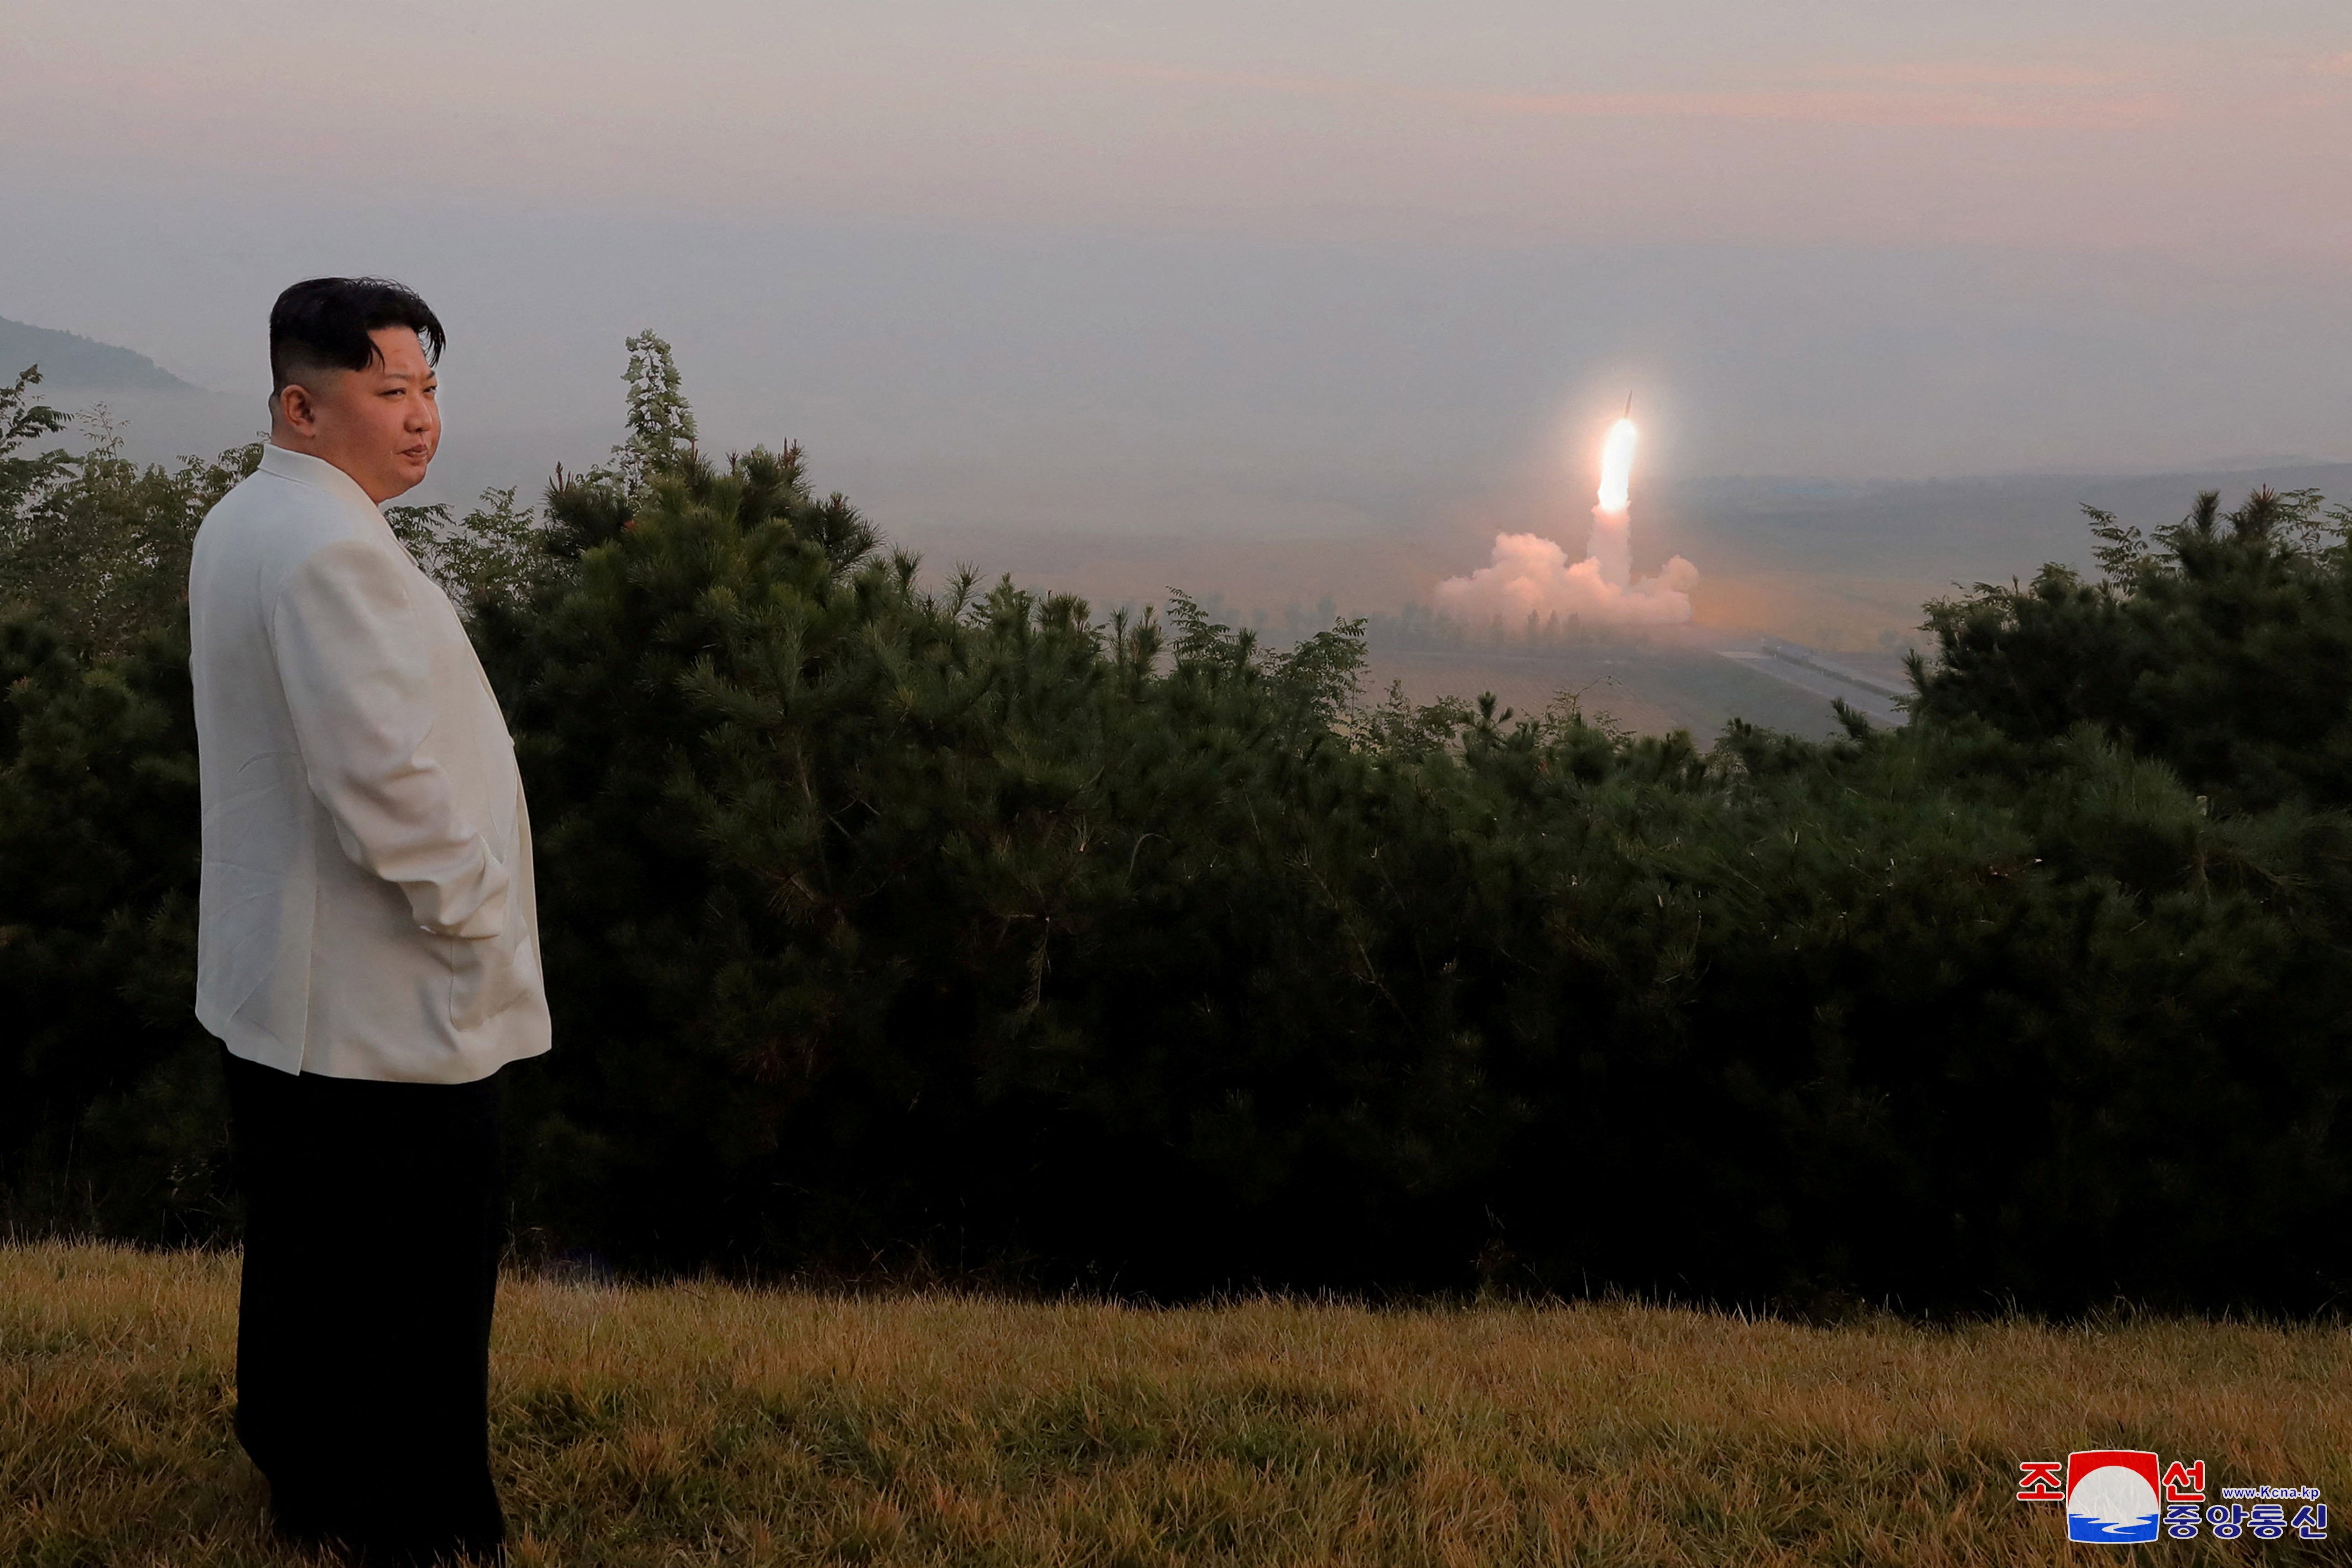 North Korea’s leader Kim Jong-un oversees a missile launch at an undisclosed location in North Korea